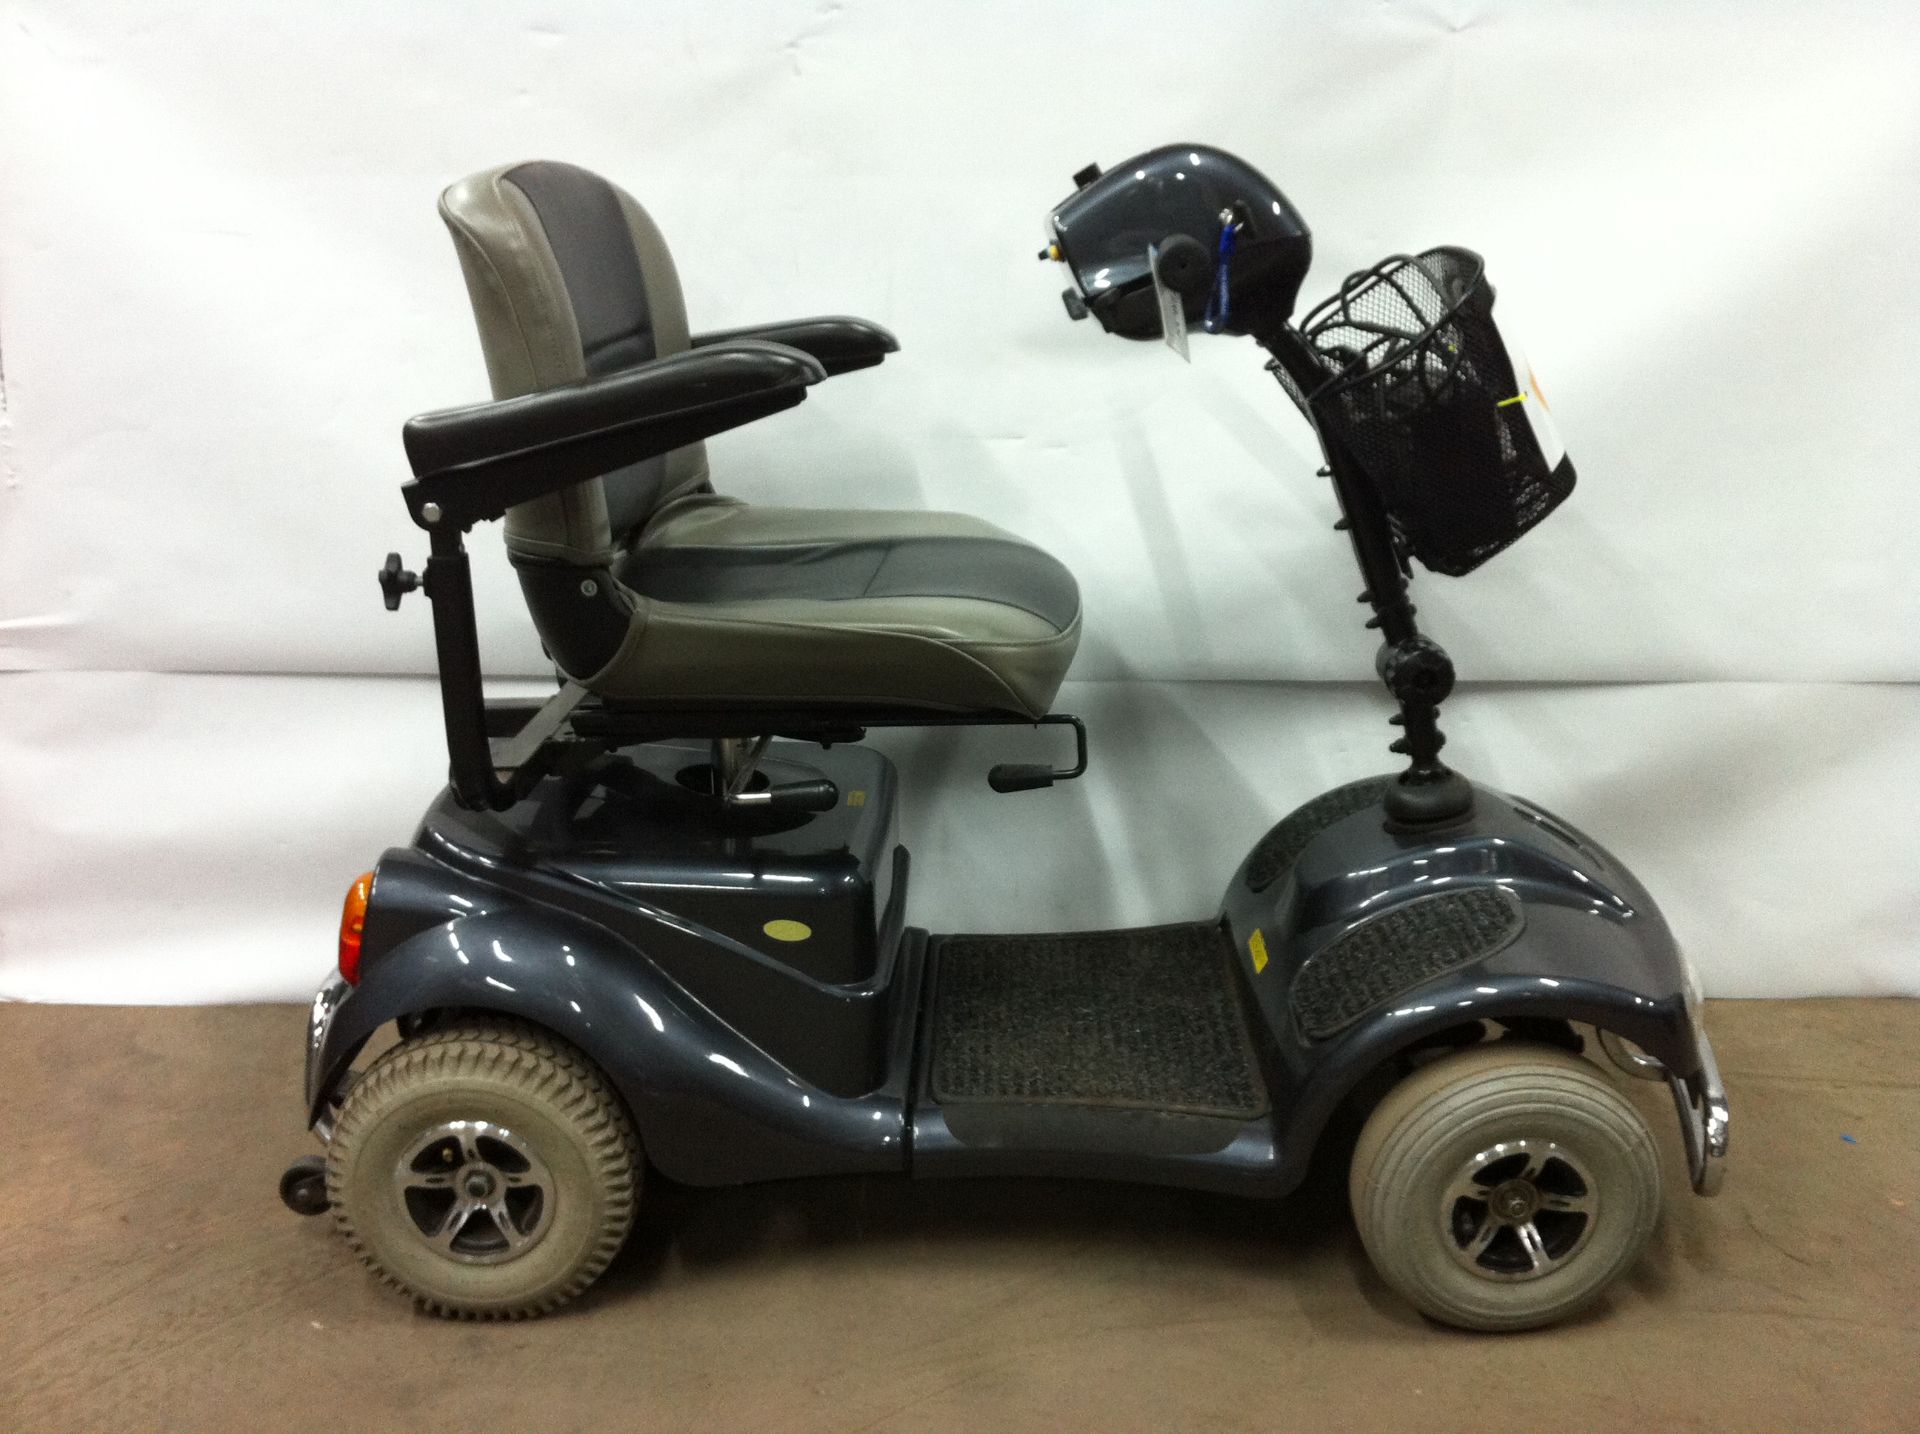 Roma Medical mobility scooter